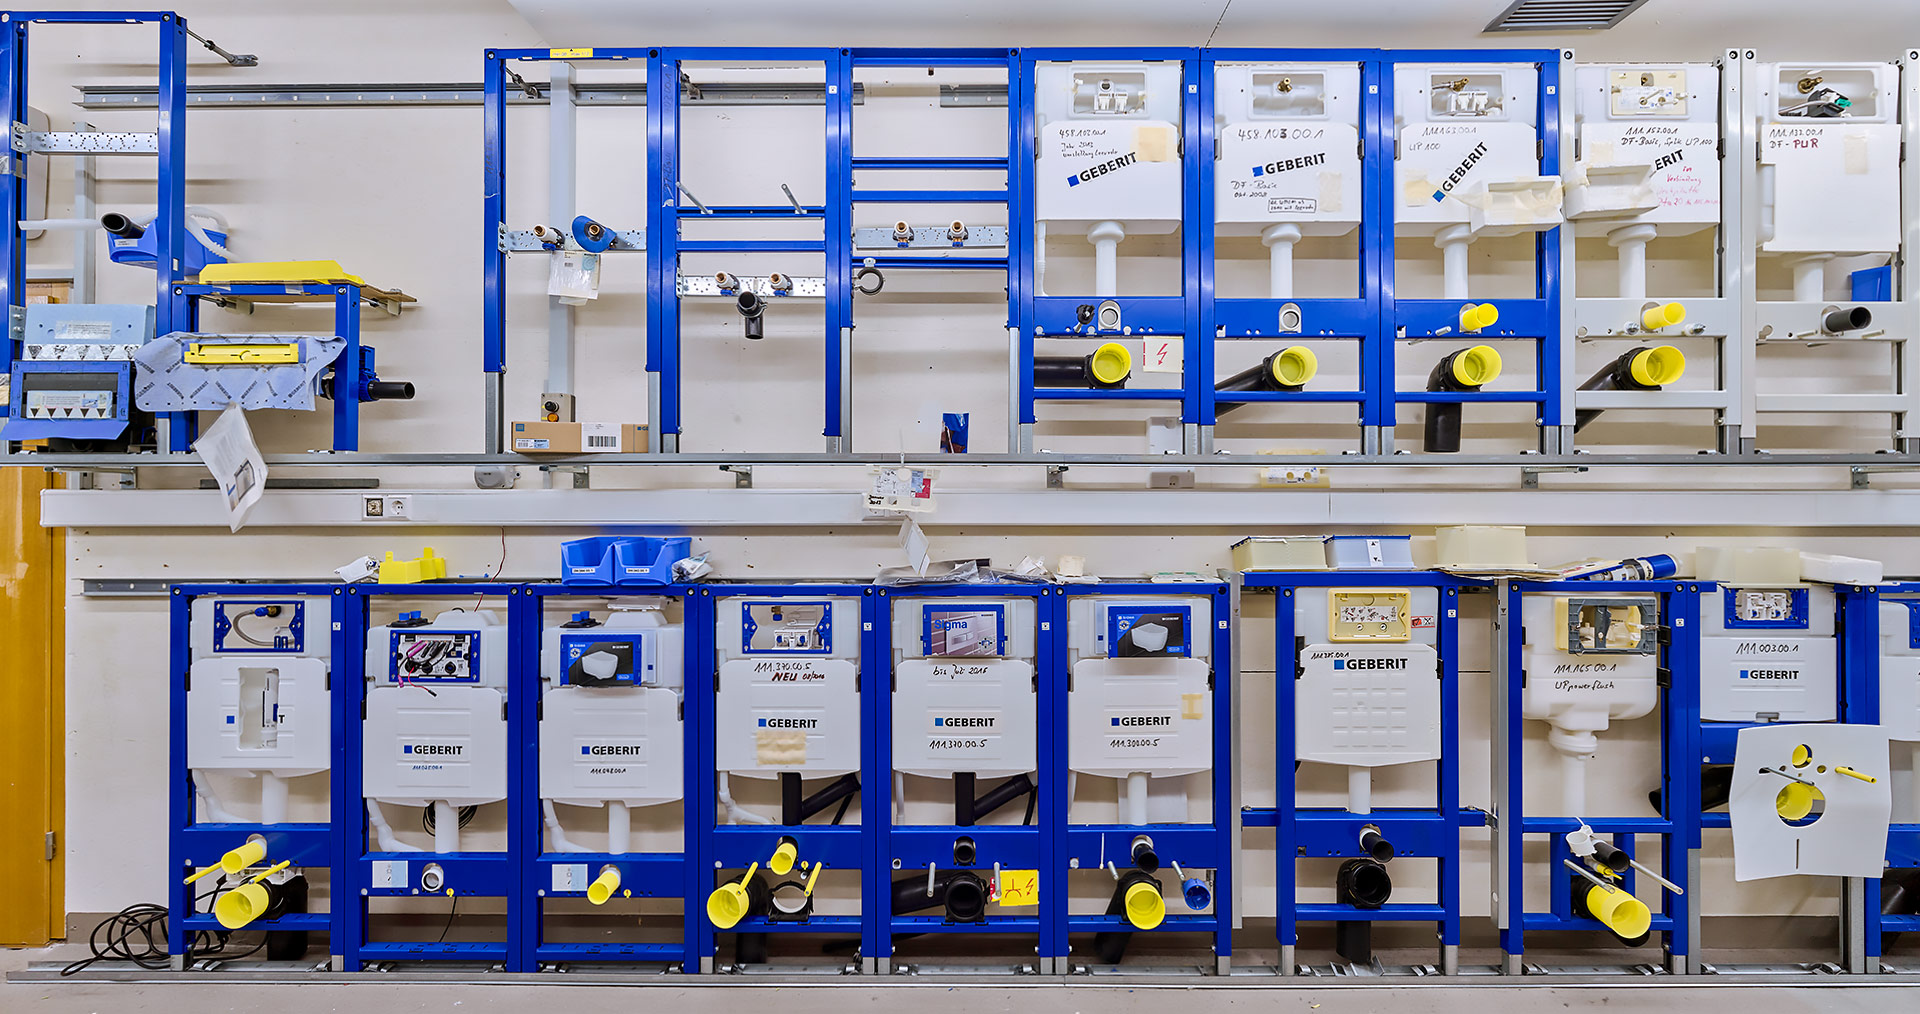 Storage rack with various models and spare parts of Geberit flush tanks, demonstrating the long-term availability of spare parts